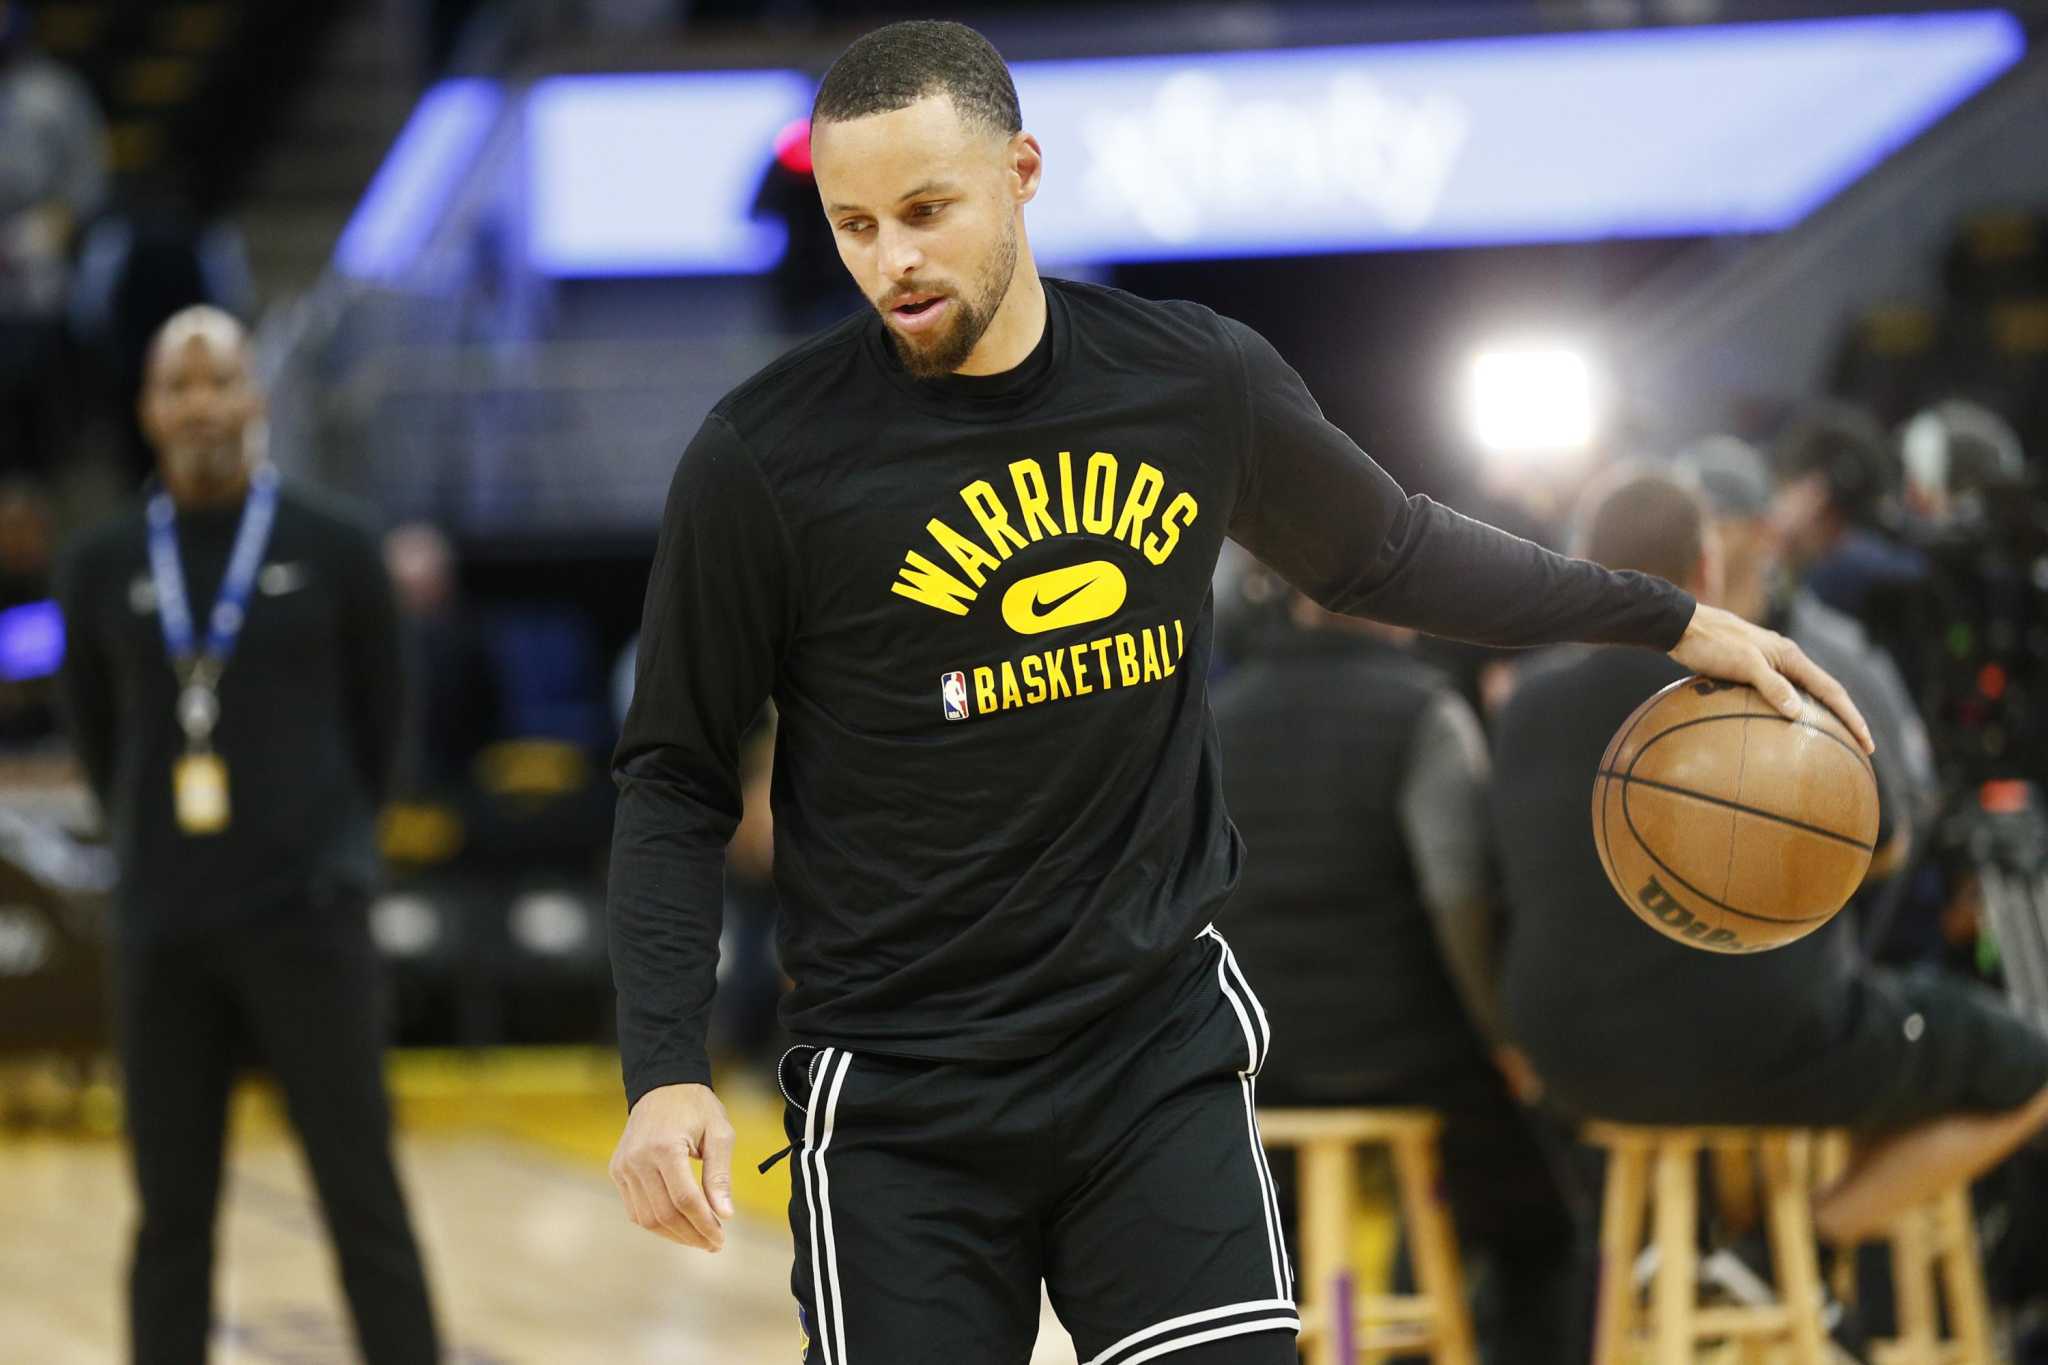 Warriors guard Stephen Curry was held out of the starting lineup again Mond...